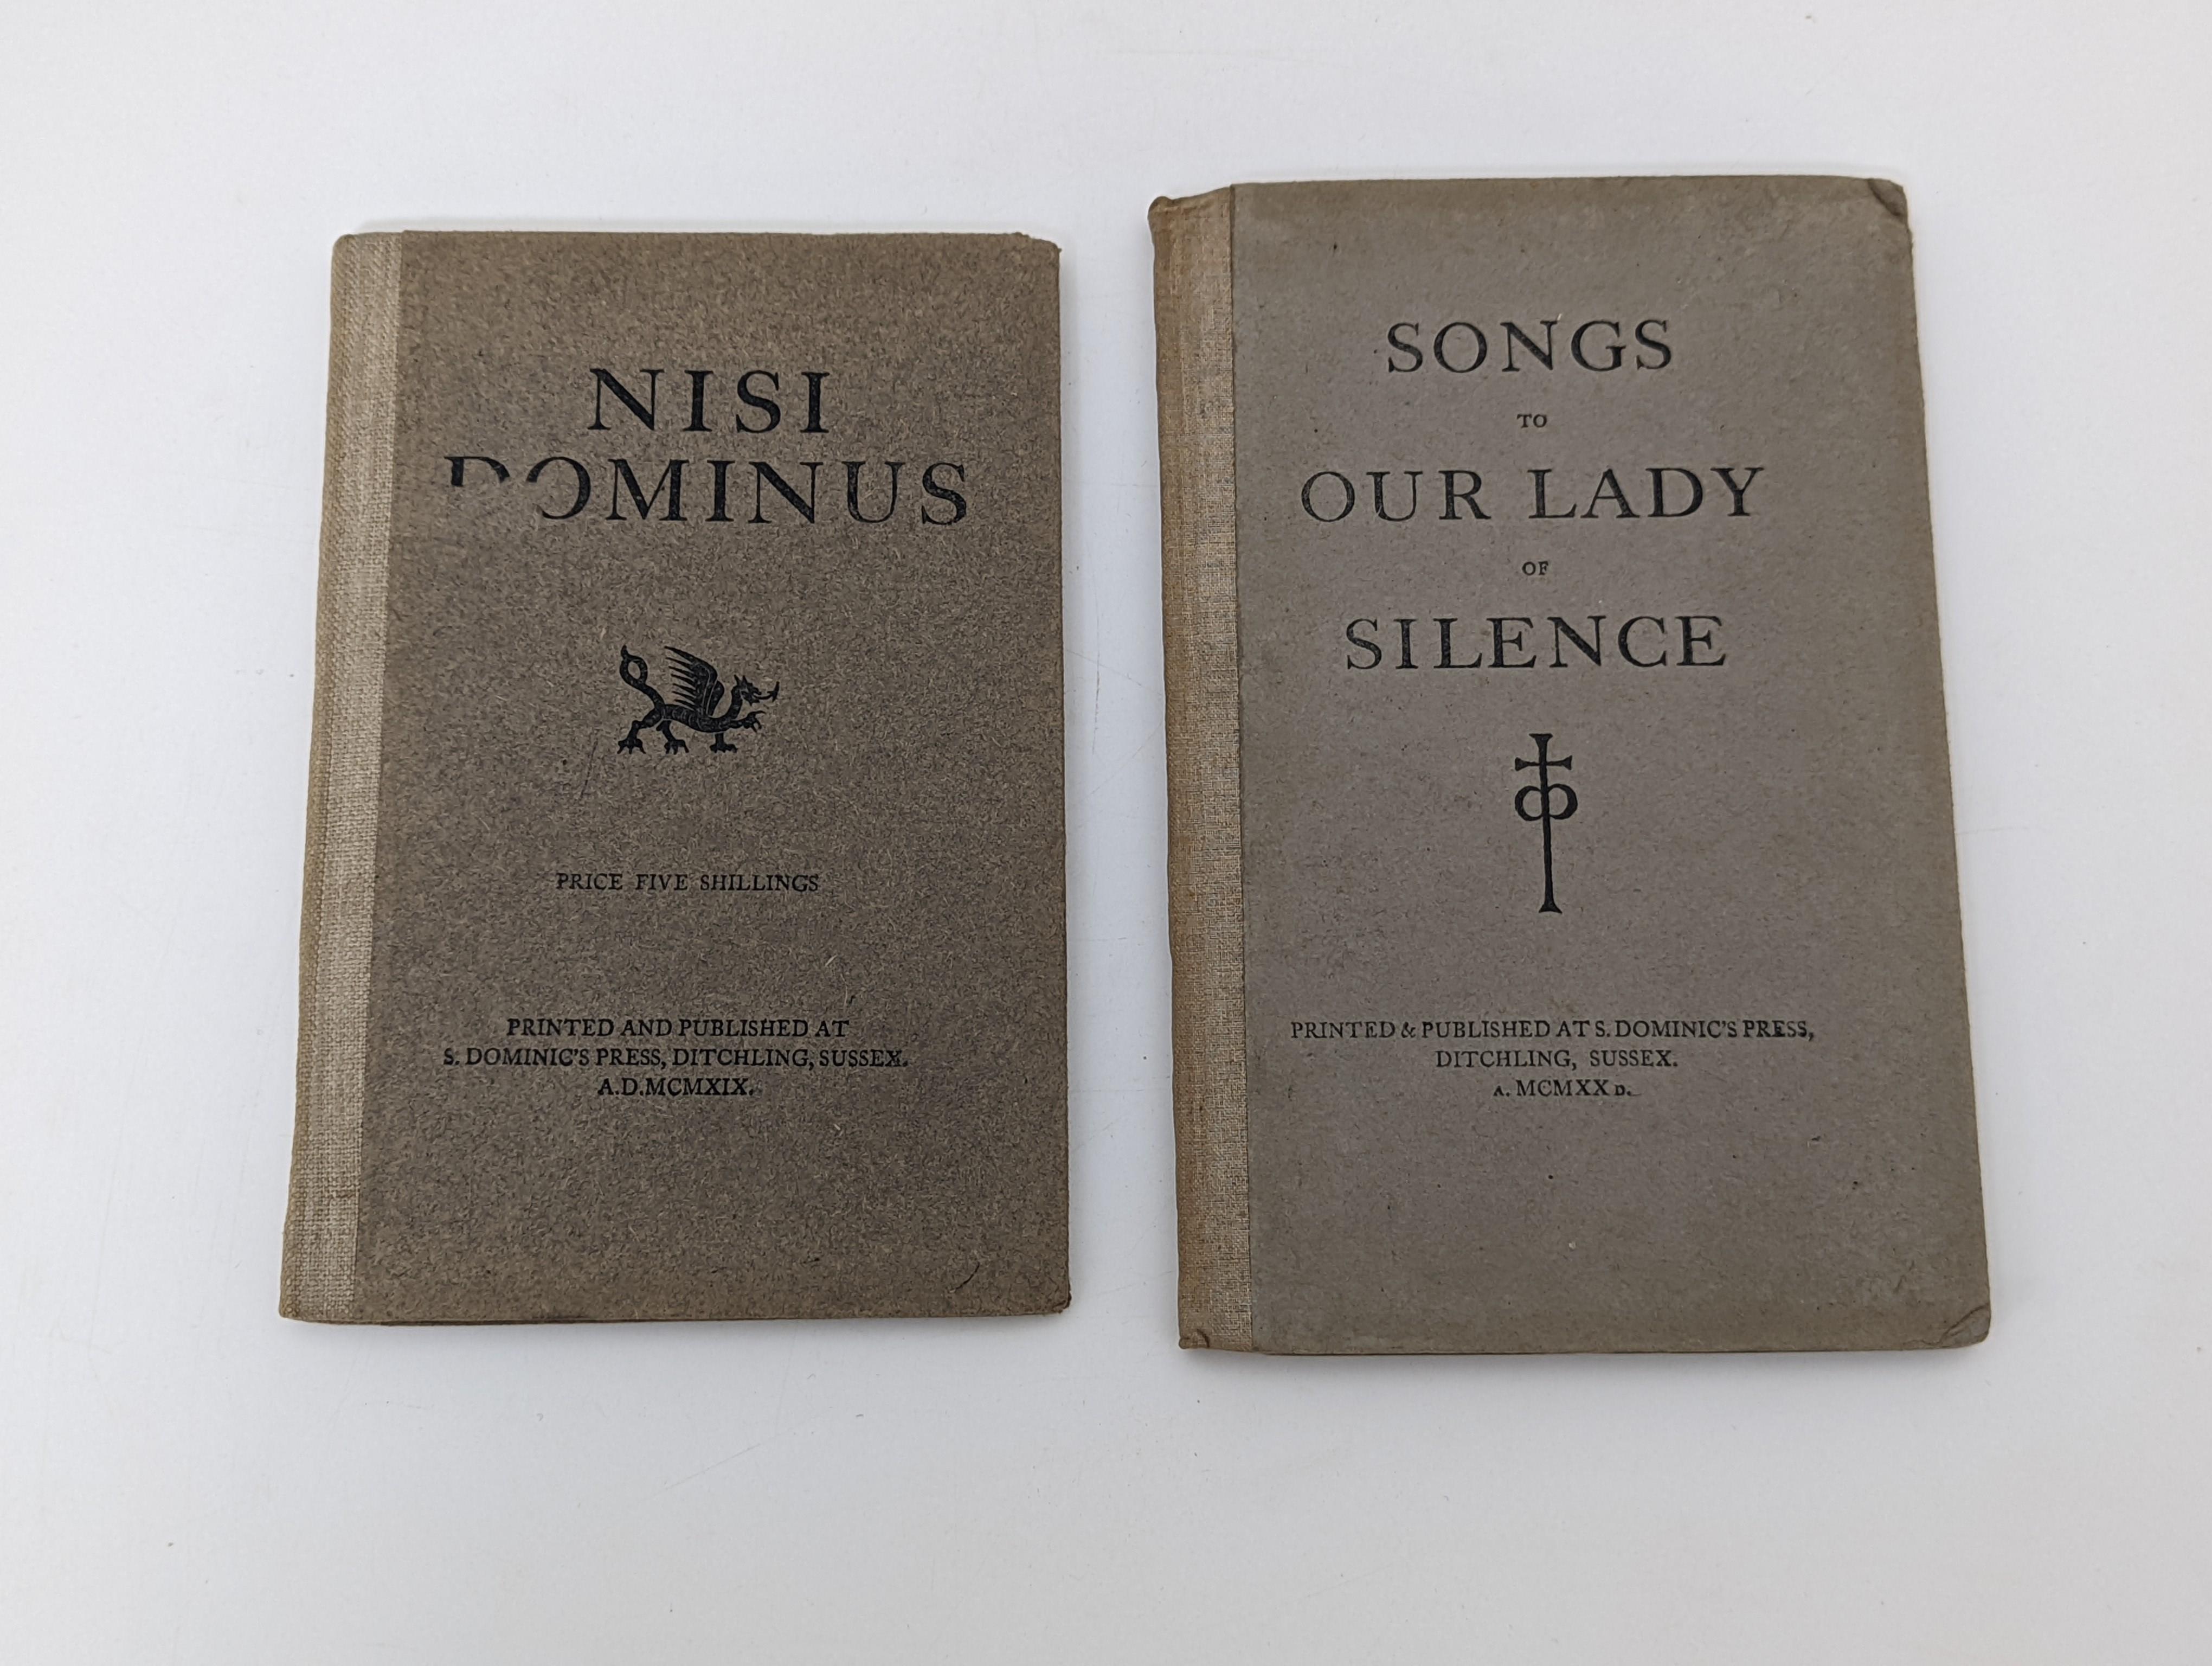 Gill, Eric (illustrator) - Pepler, Hilary Douglas Clark - Nisi Dominus, with 17 wood-engravings, 8vo, original cloth-backed boards, St. Dominic’s Press, Ditchling, 1919 and Woellwarth, Mary - Songs of Our Lady of Silence